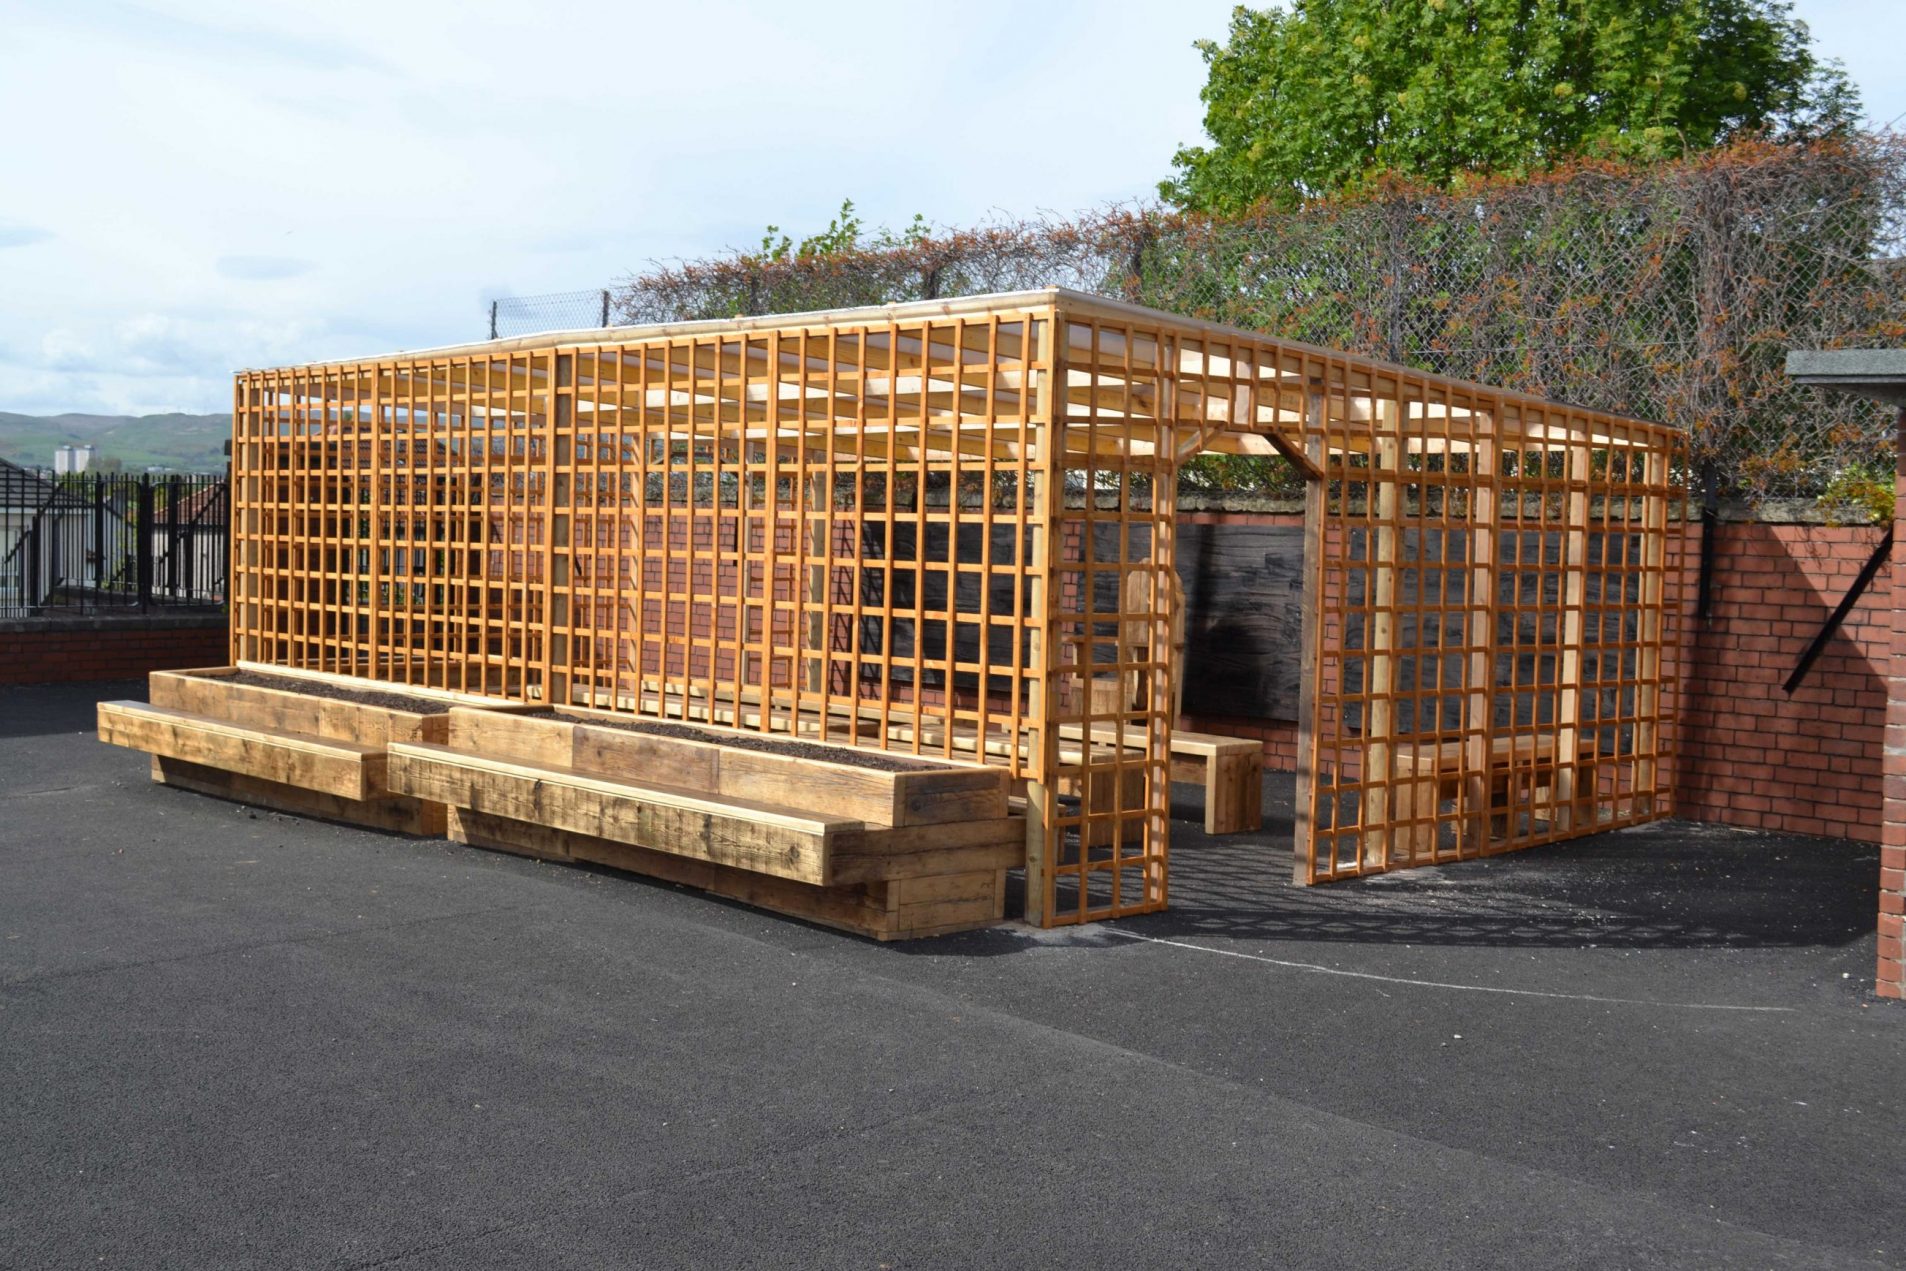 Outdoor classroom made with reclaimed wood with seated planters and trellis